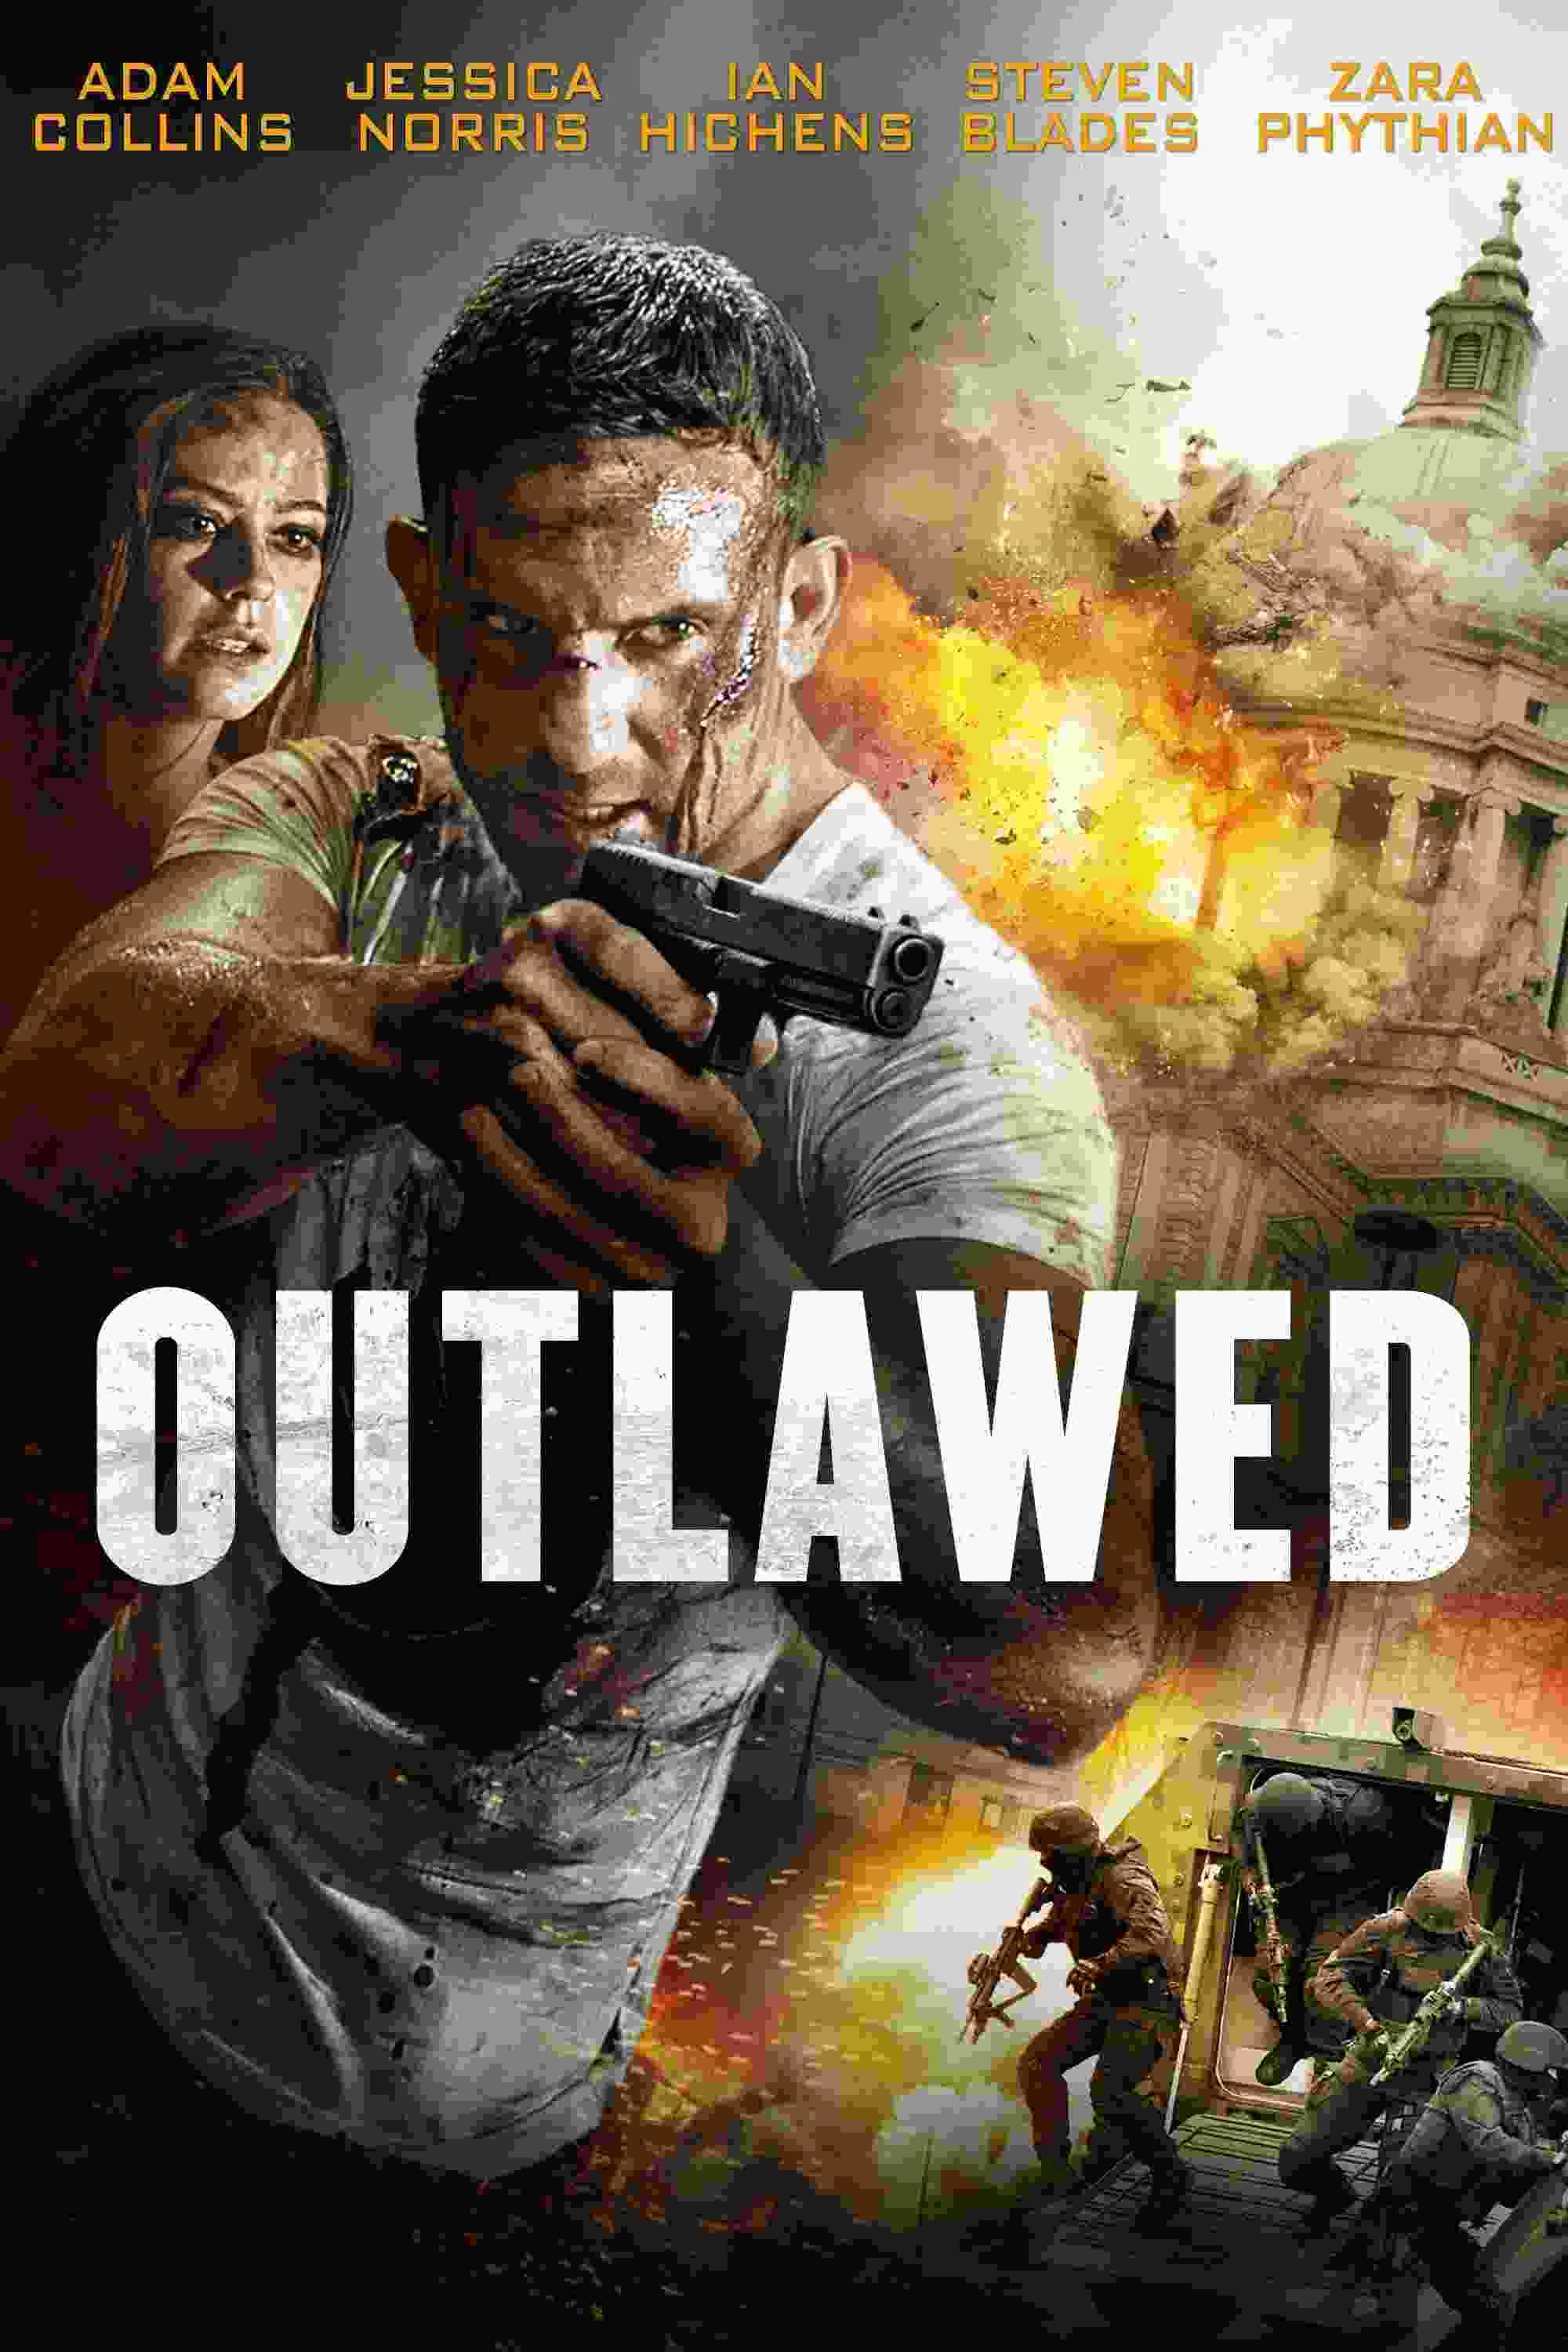 Outlawed (2018) Adam Collins